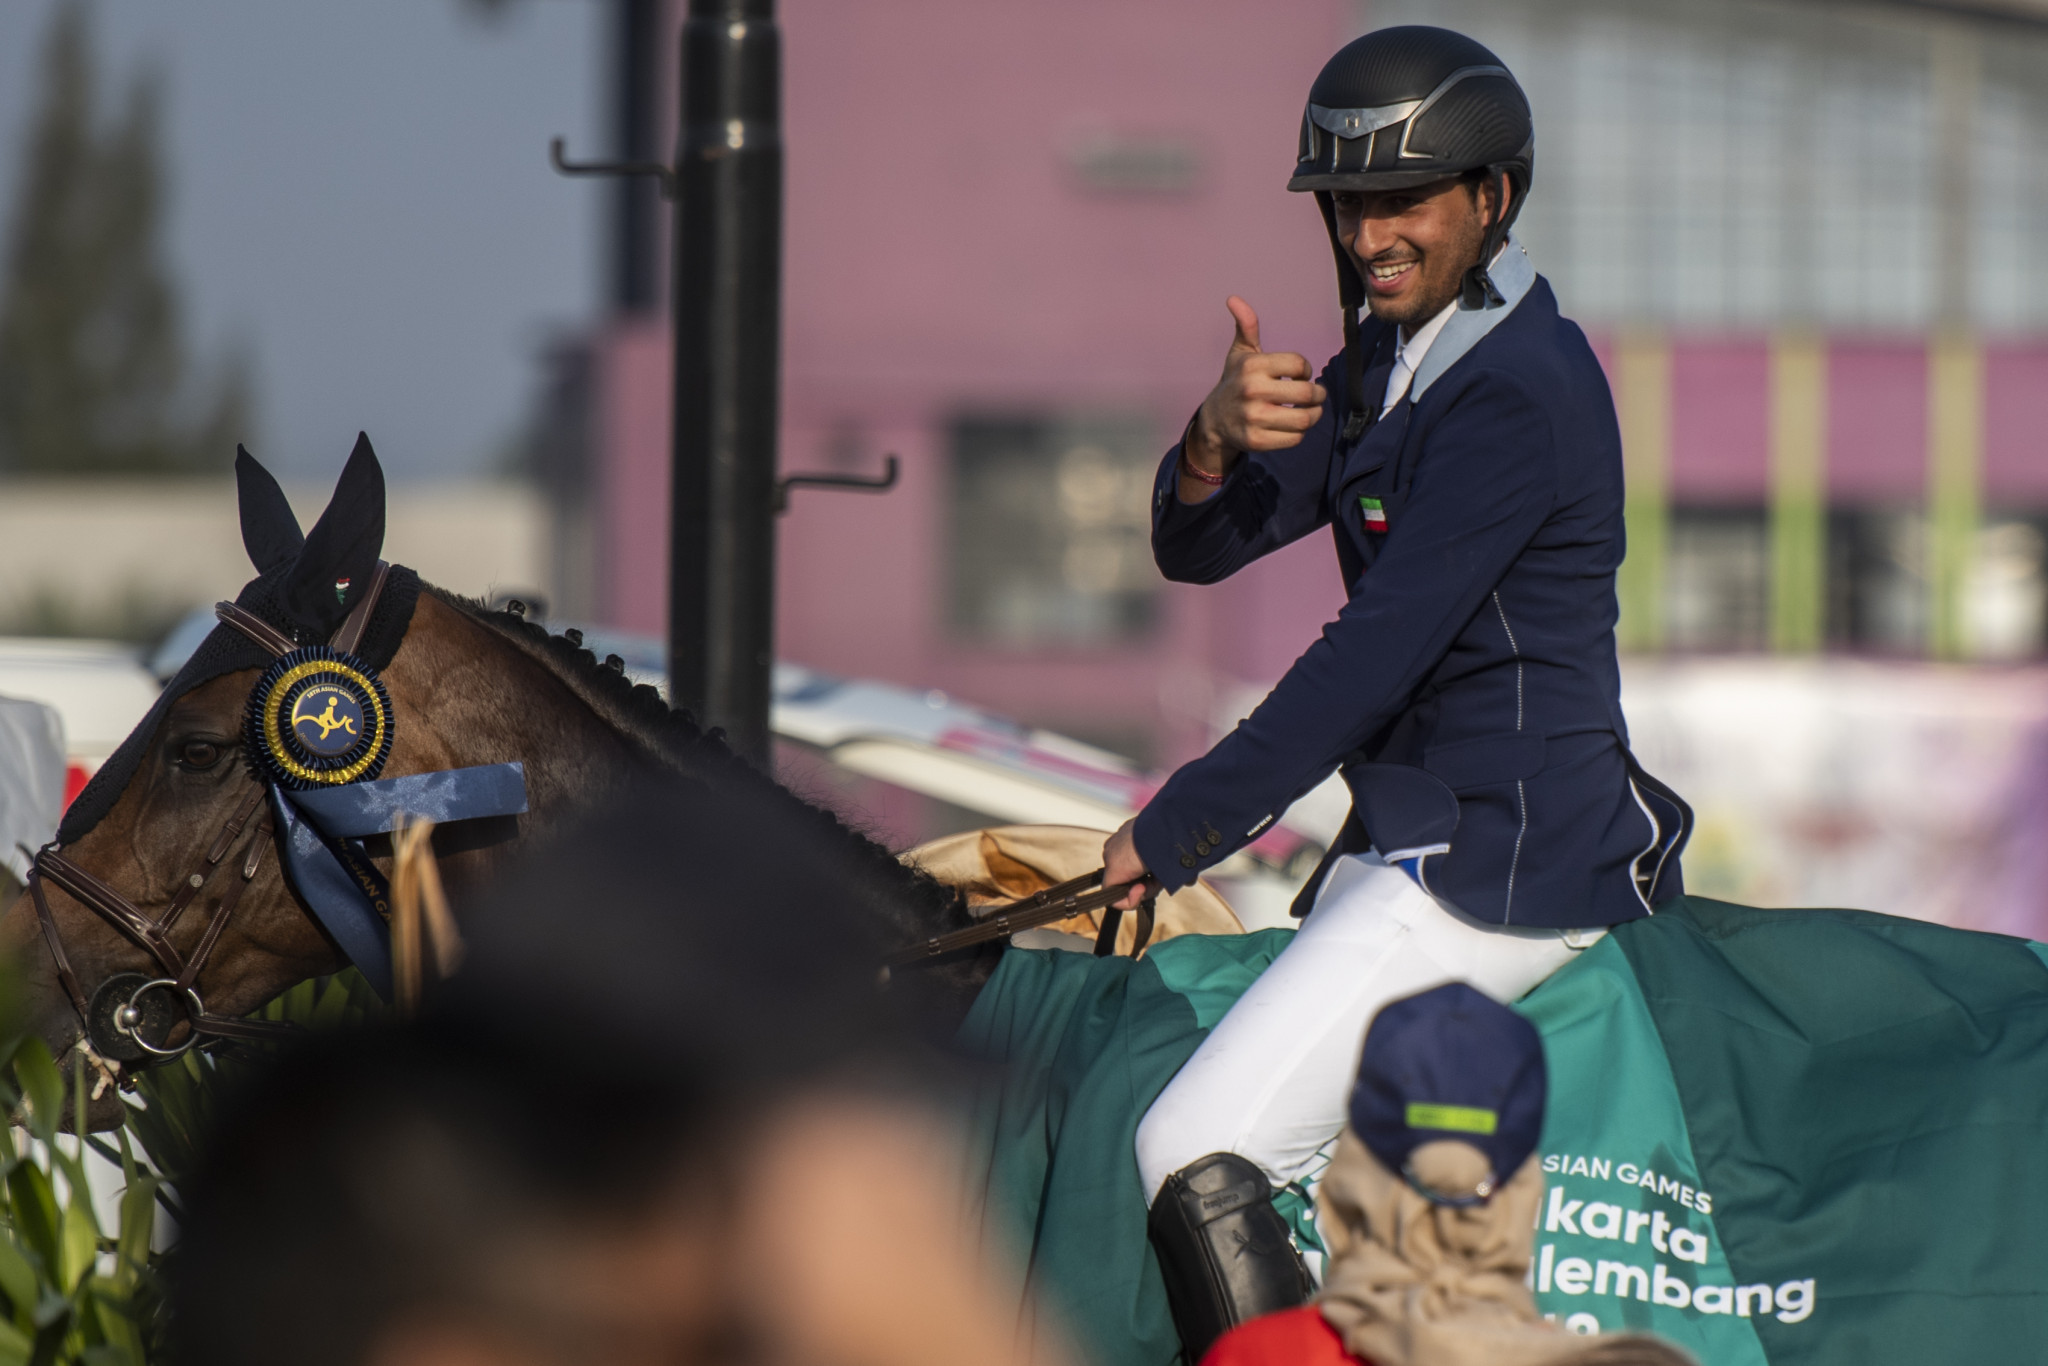 Kuwait's third gold medal of the 2018 Asian Games was won by equestrian rider Ali Alkhorafi, who came out on top in the jumping individual competition ©Getty Images